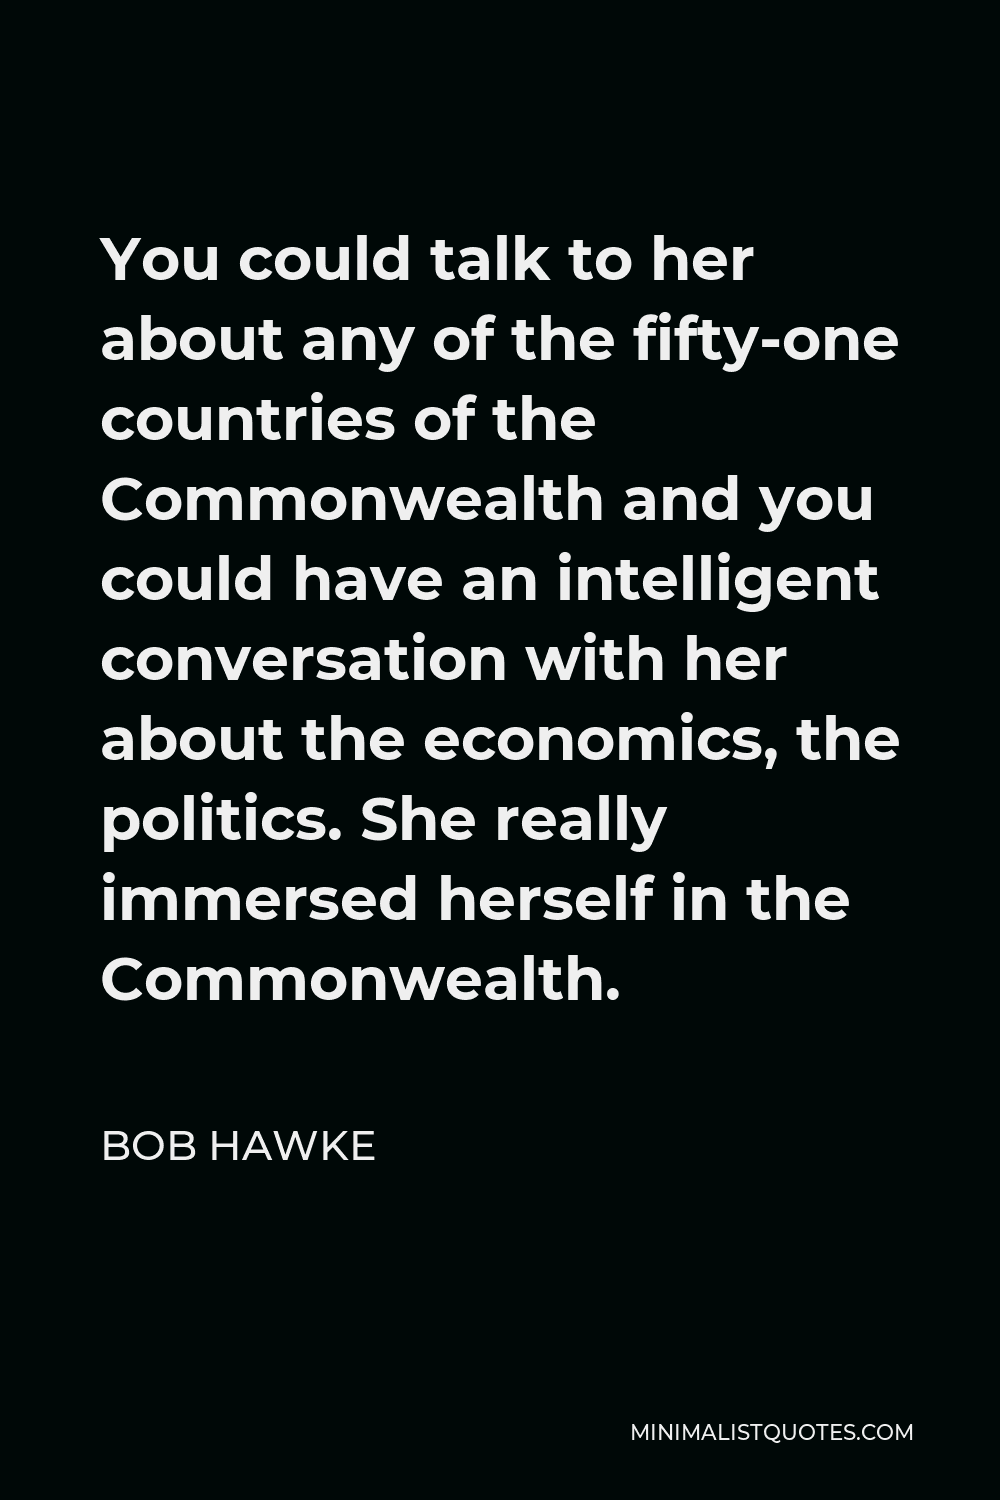 Bob Hawke Quote - You could talk to her about any of the fifty-one countries of the Commonwealth and you could have an intelligent conversation with her about the economics, the politics. She really immersed herself in the Commonwealth.